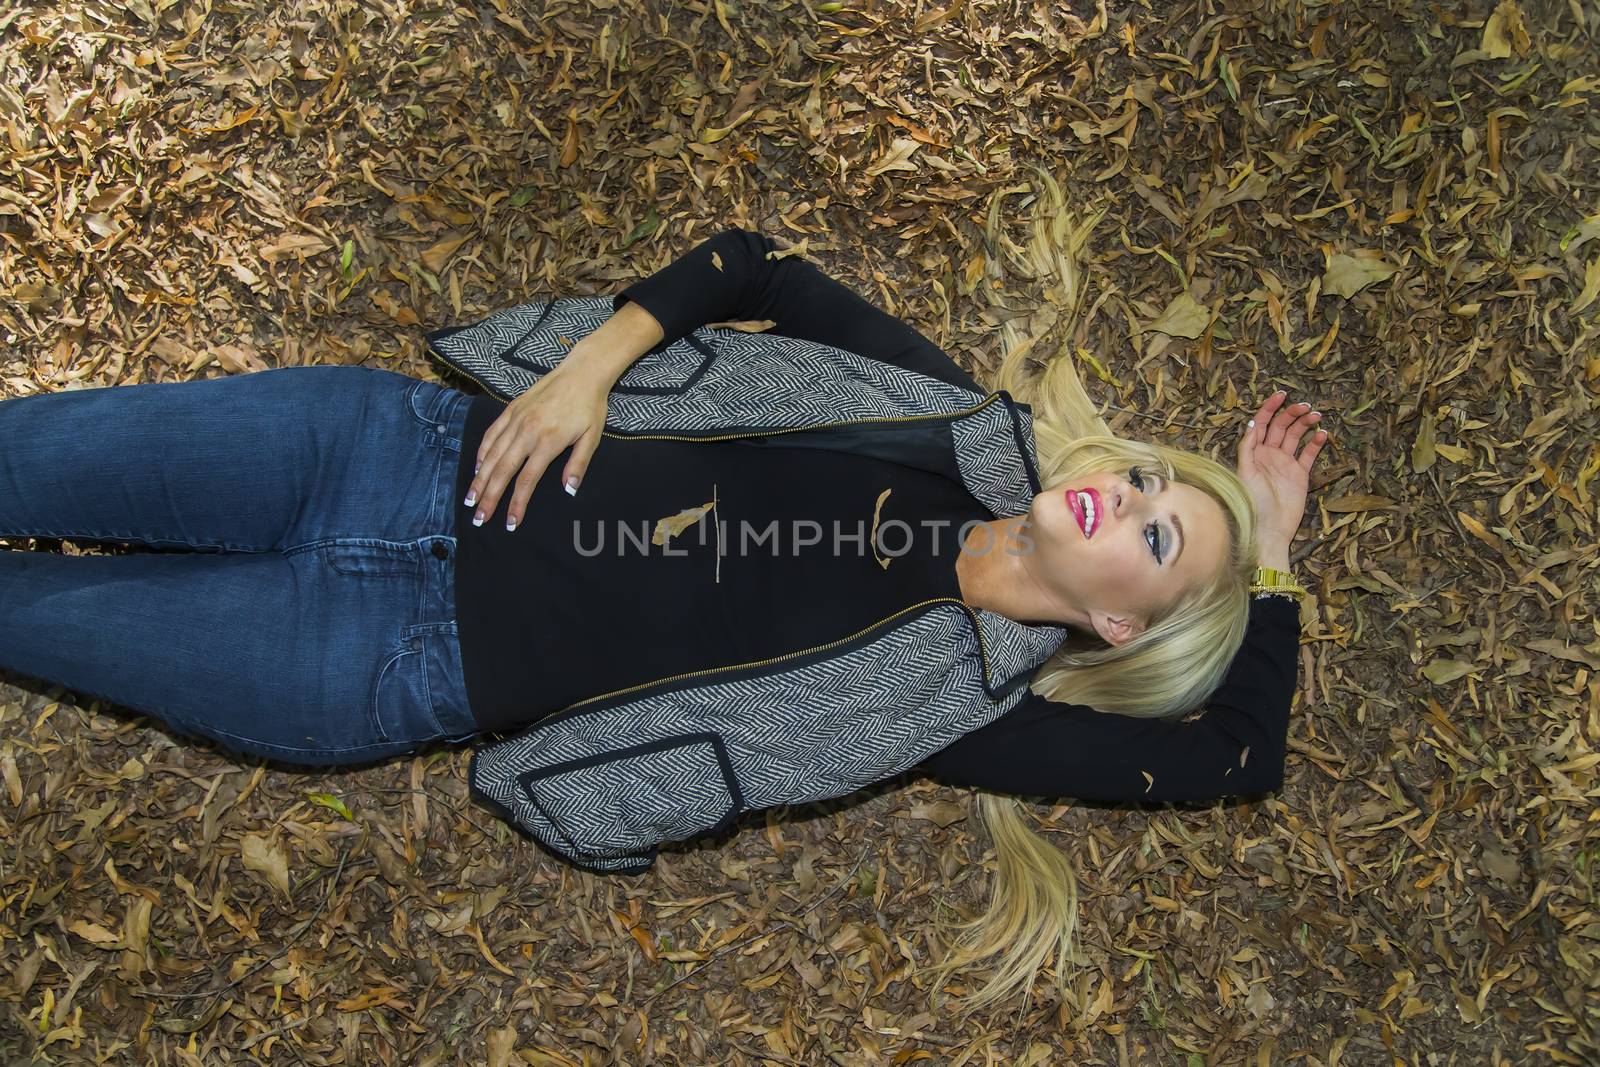 A blonde model posing in an outdoor environment